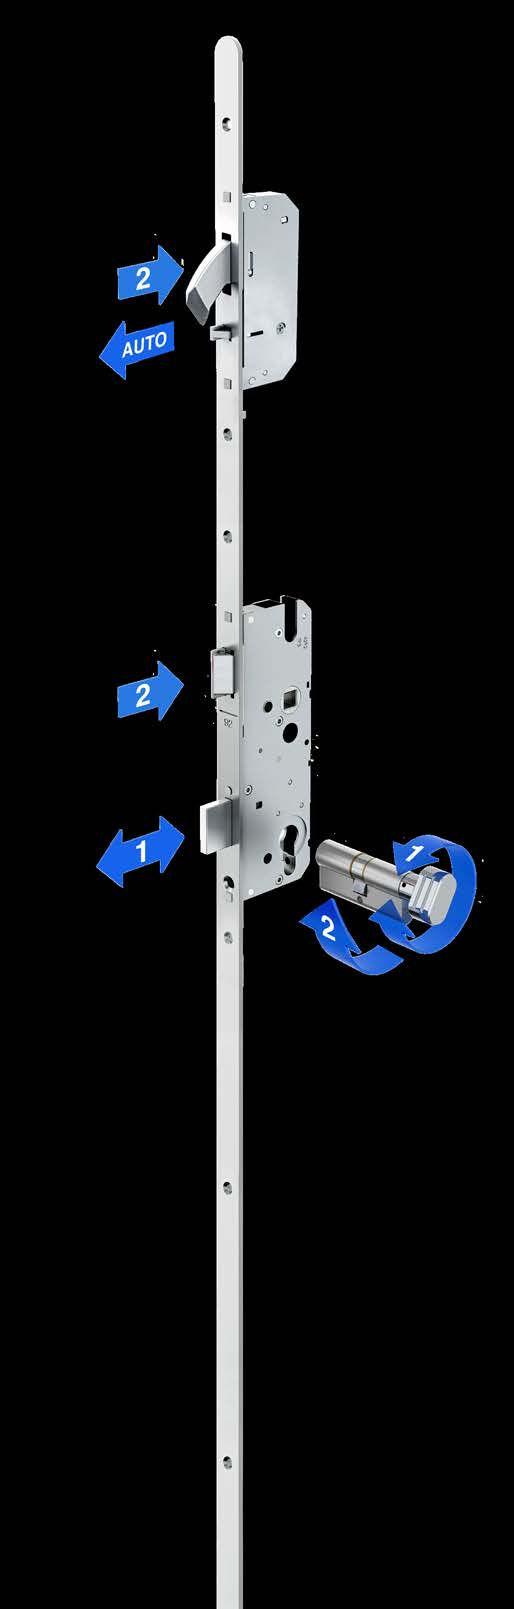 82 All prices stated include the multipoint lock and all keeps needed for installation The Reliance D50 and D51 multipoint locking systems have been designed to complement and enhances the visual